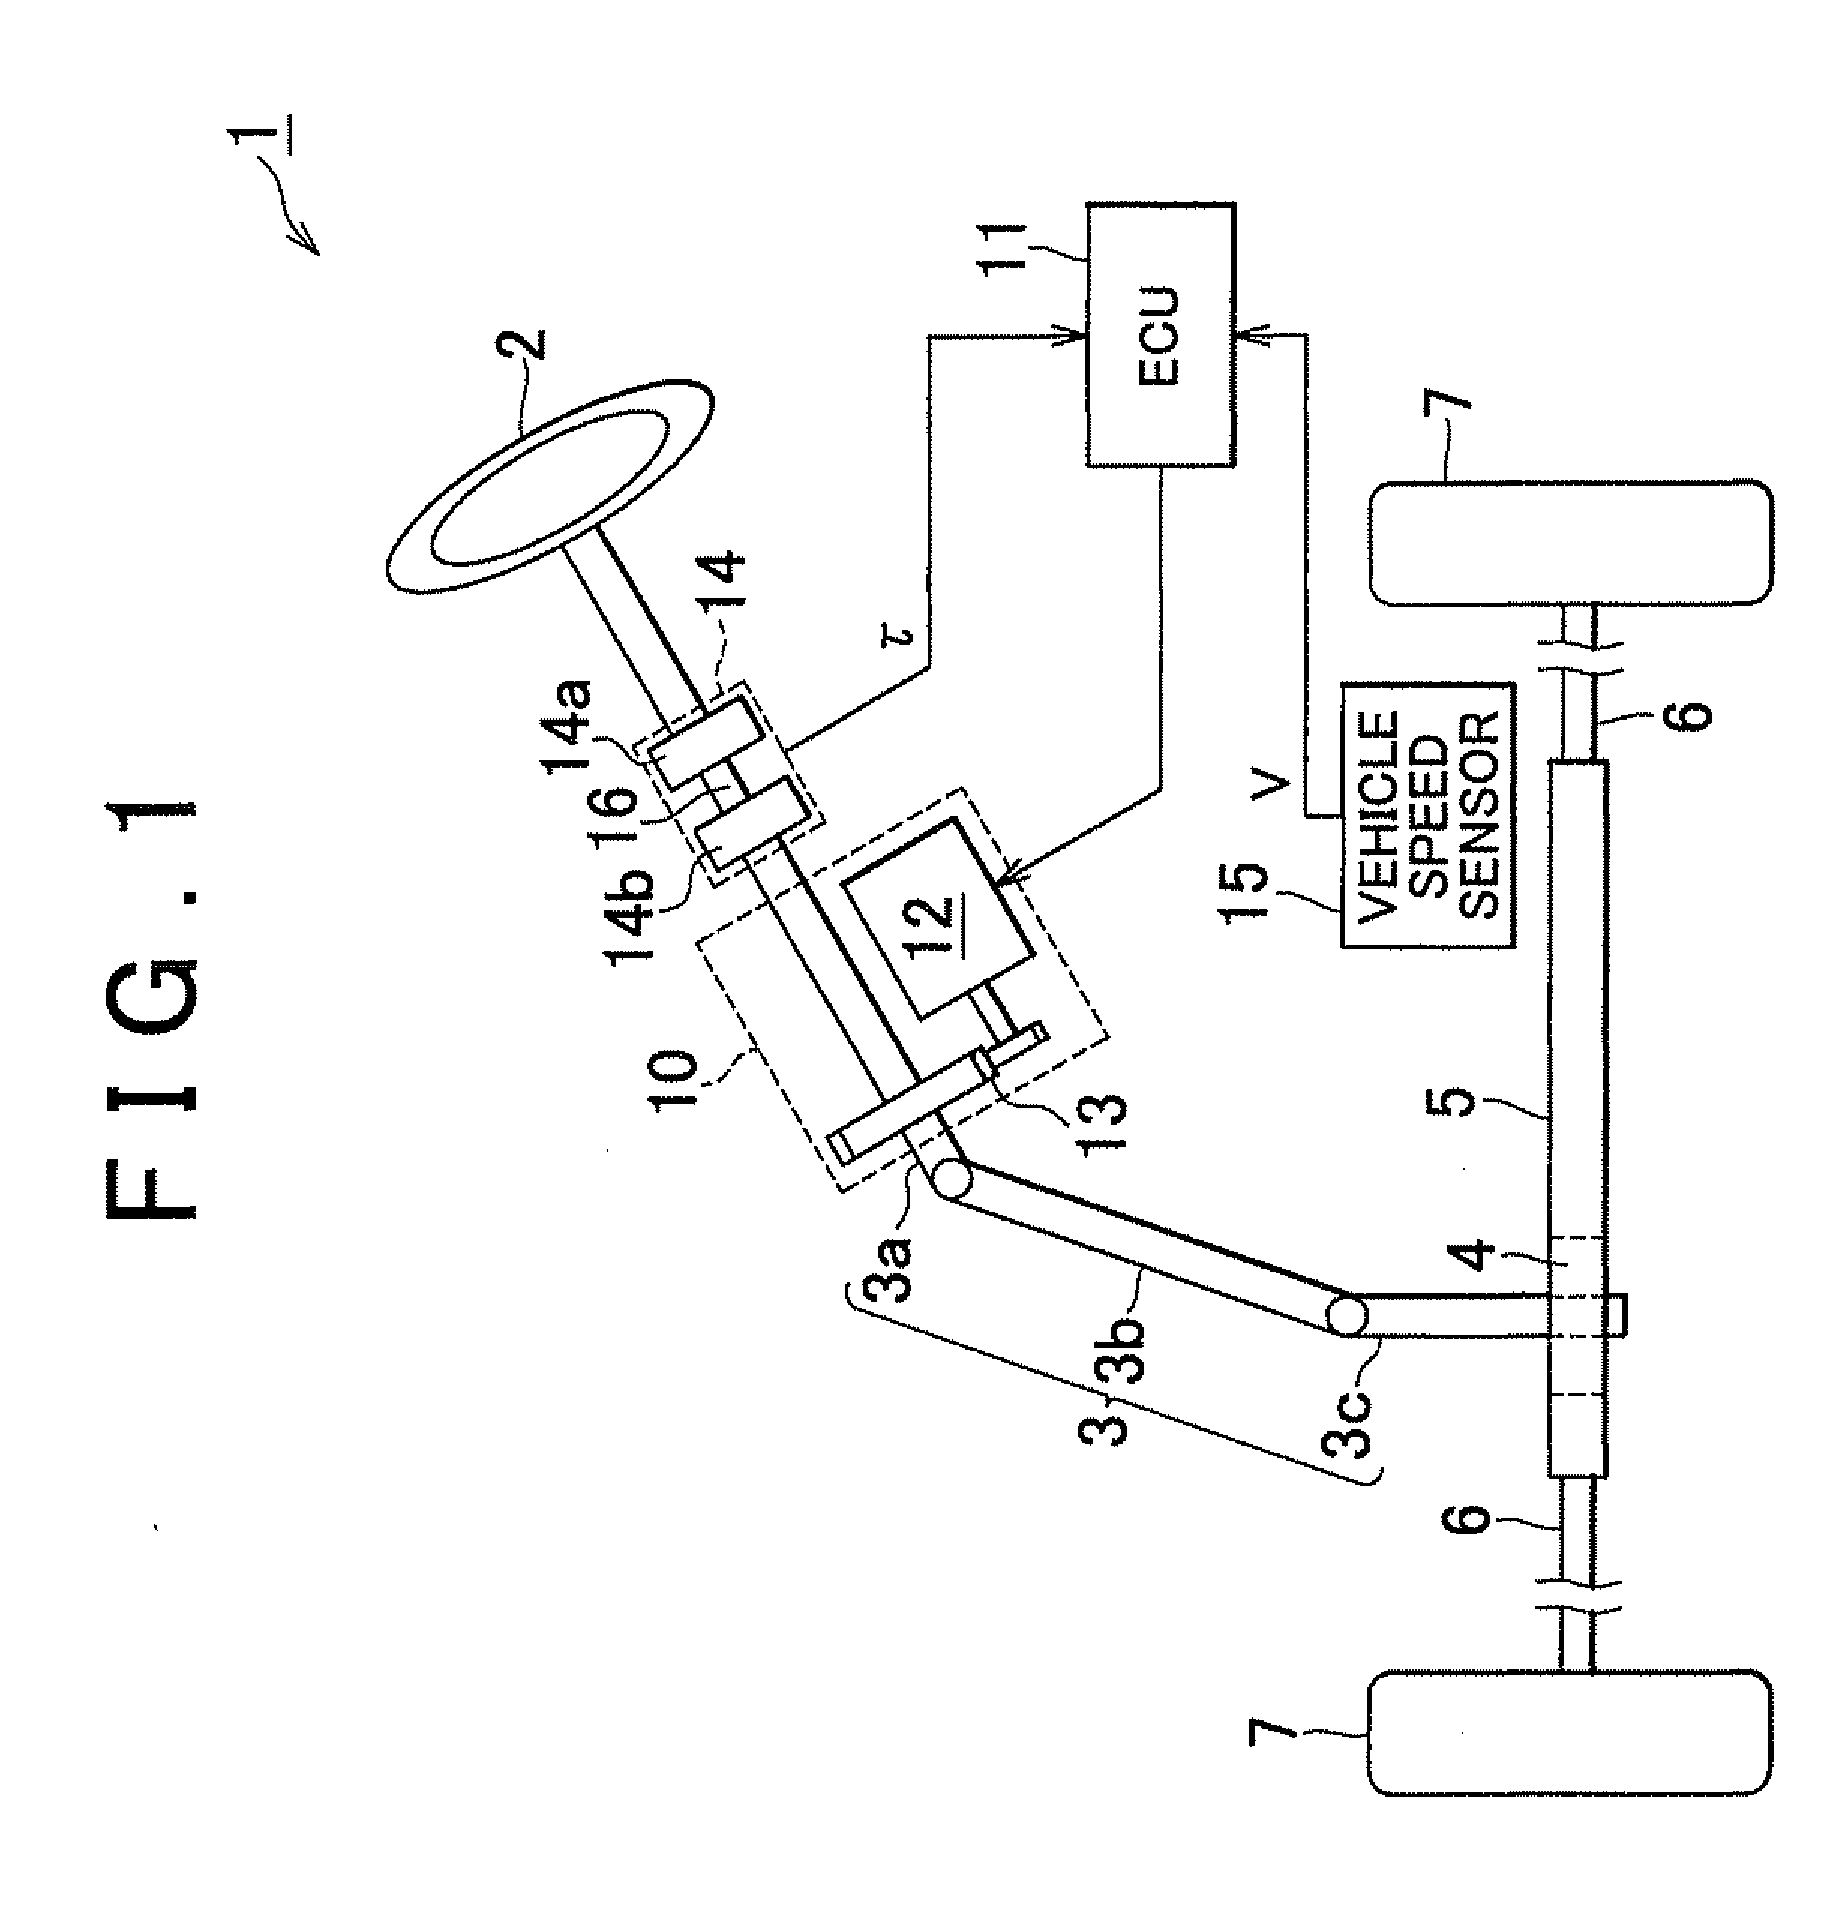 Motor controller and electric power steering system